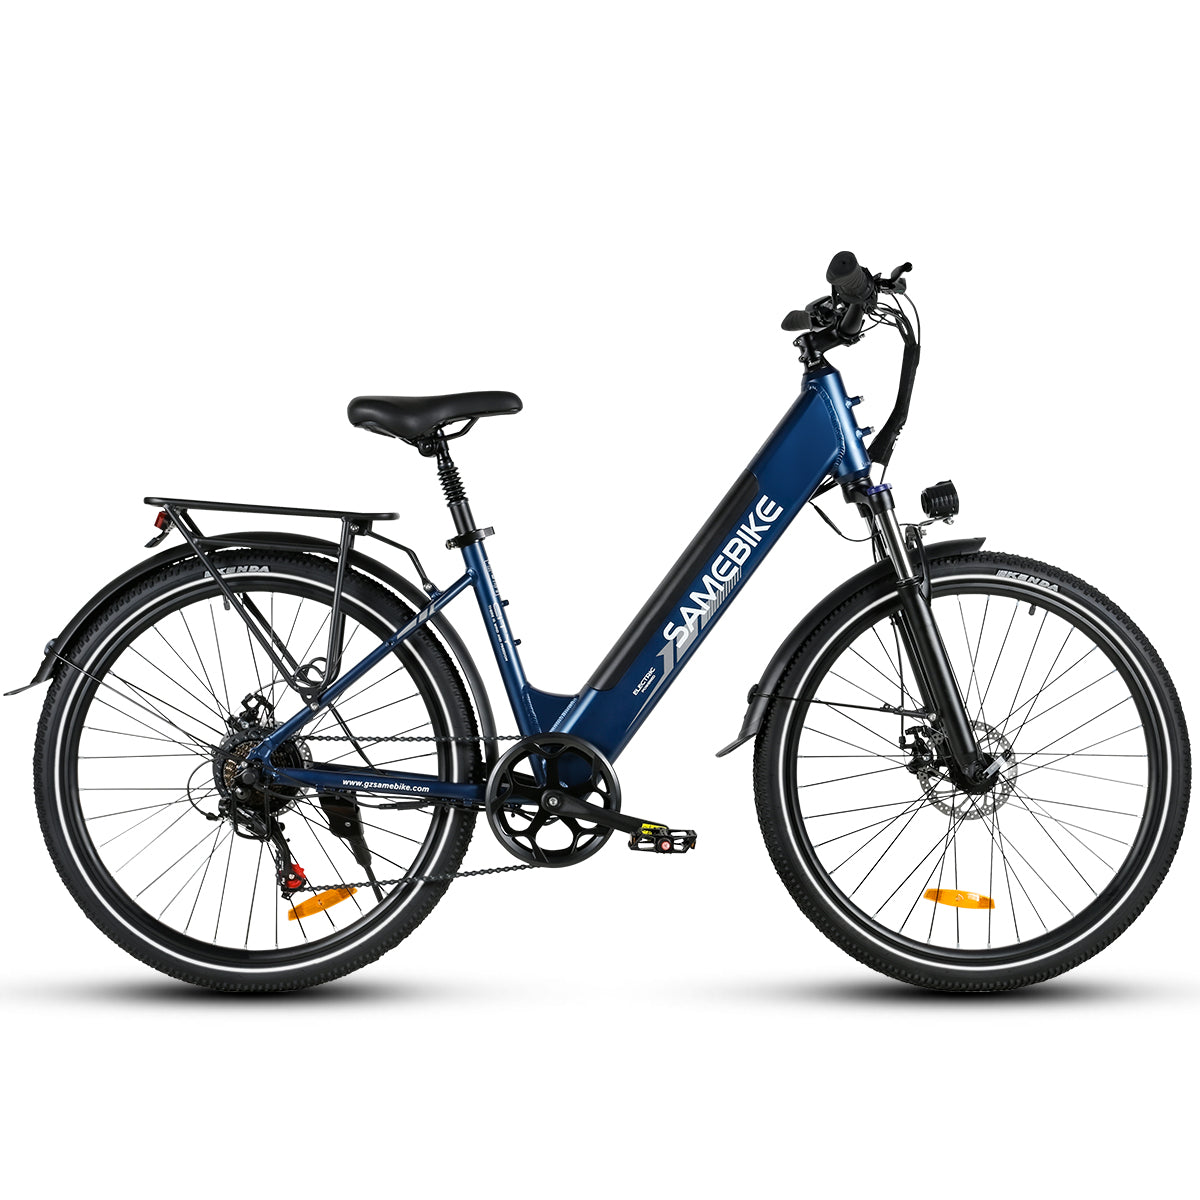 SAMBIKE RS-A01 PRO Electric Bike - 500W Motor, 32 km/h, 27.5" Tires, Dual Suspension